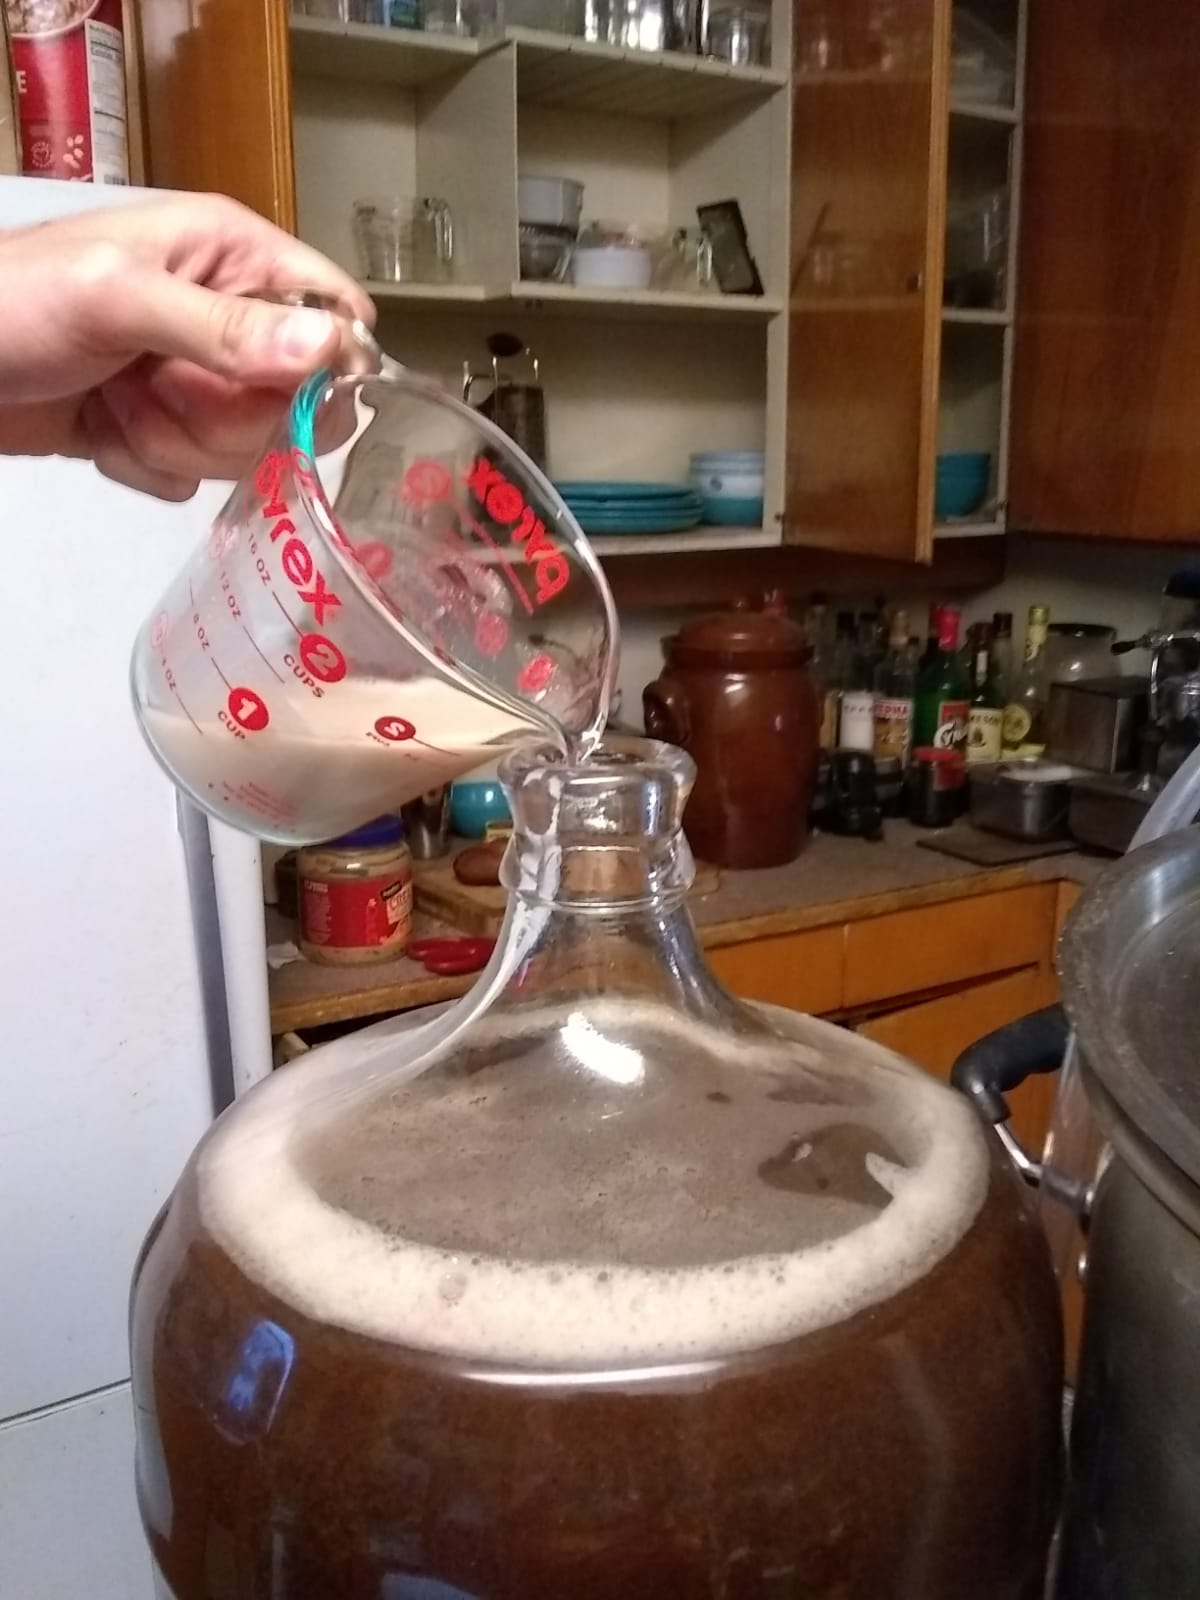 A hand pouring a measuring cup with yeast into the fermentator.